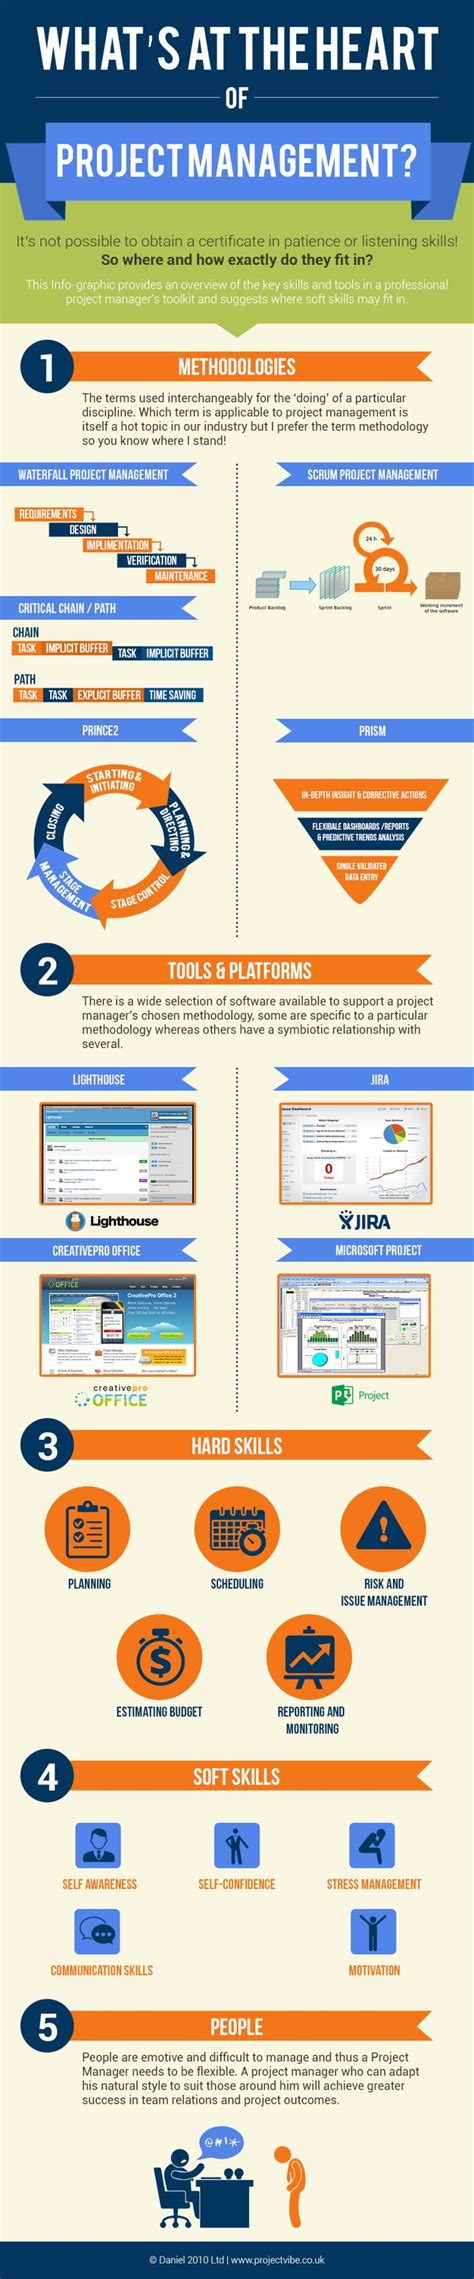 Project Management Infographic Management Infographic Project